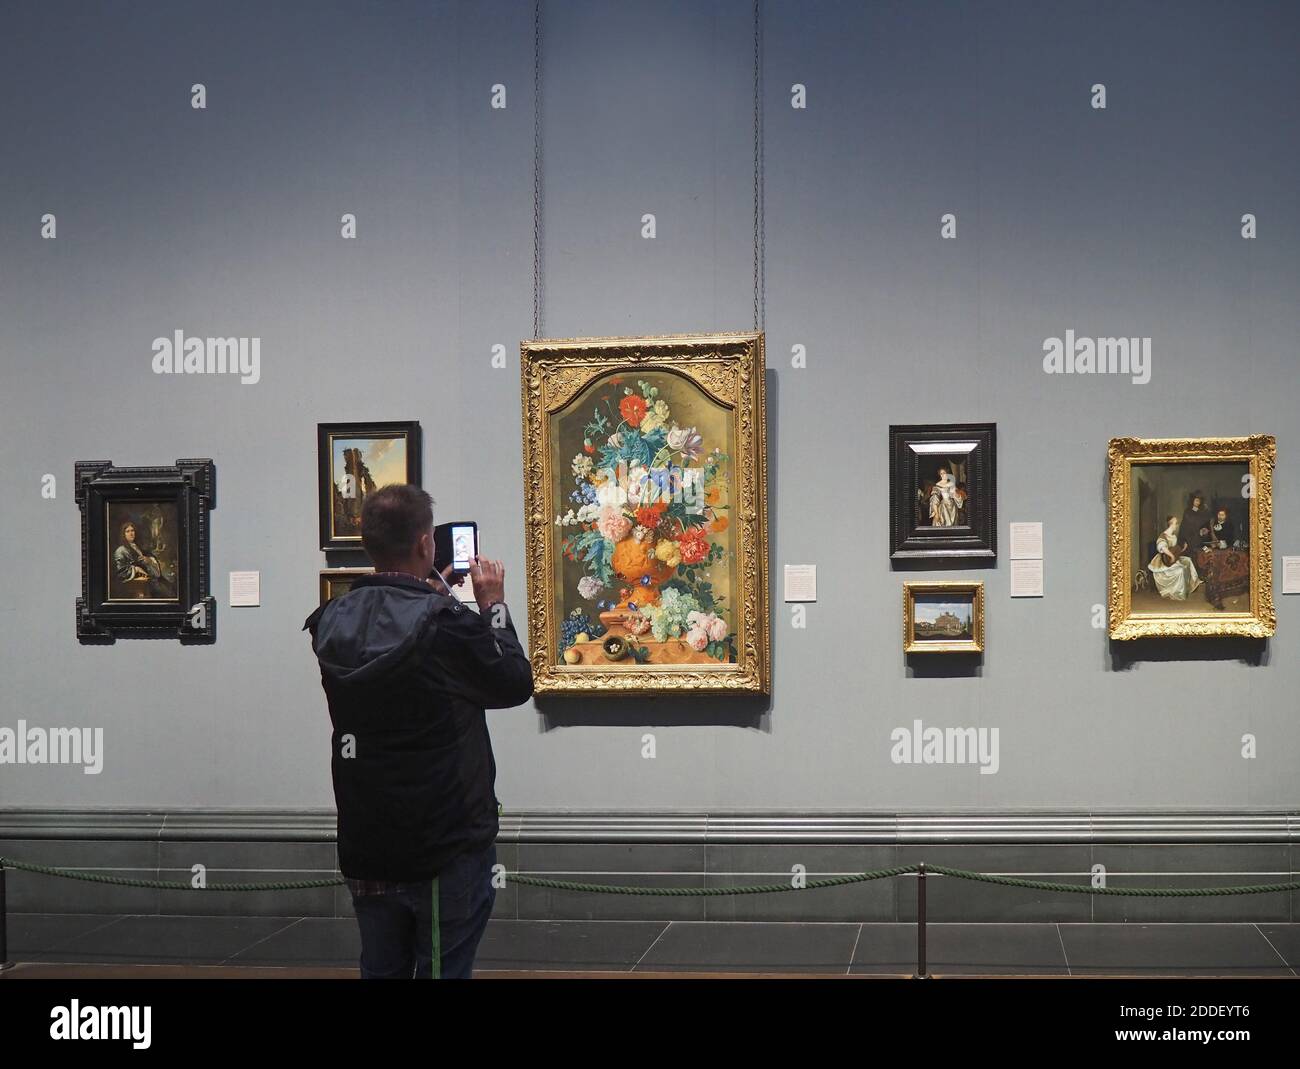 London, England - September 27, 2016:  A visitor admires the old masters at the National Gallery and records it with his telephone camera. Stock Photo